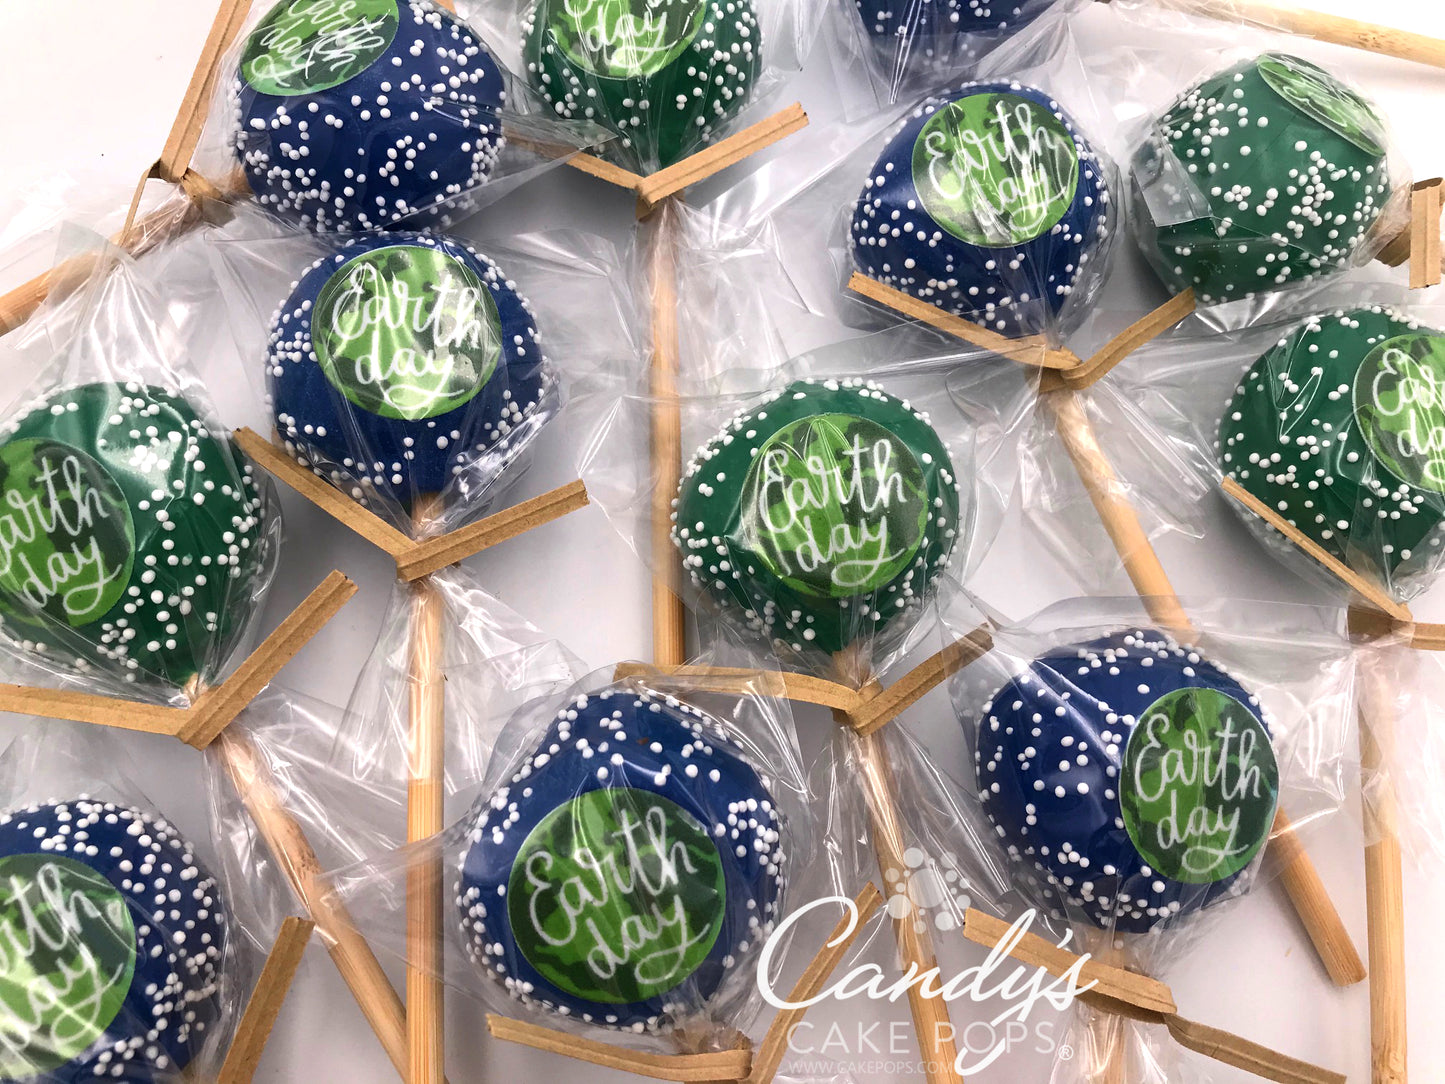 Earth Day Cake Pops - April 22nd - Candy's Cake Pops